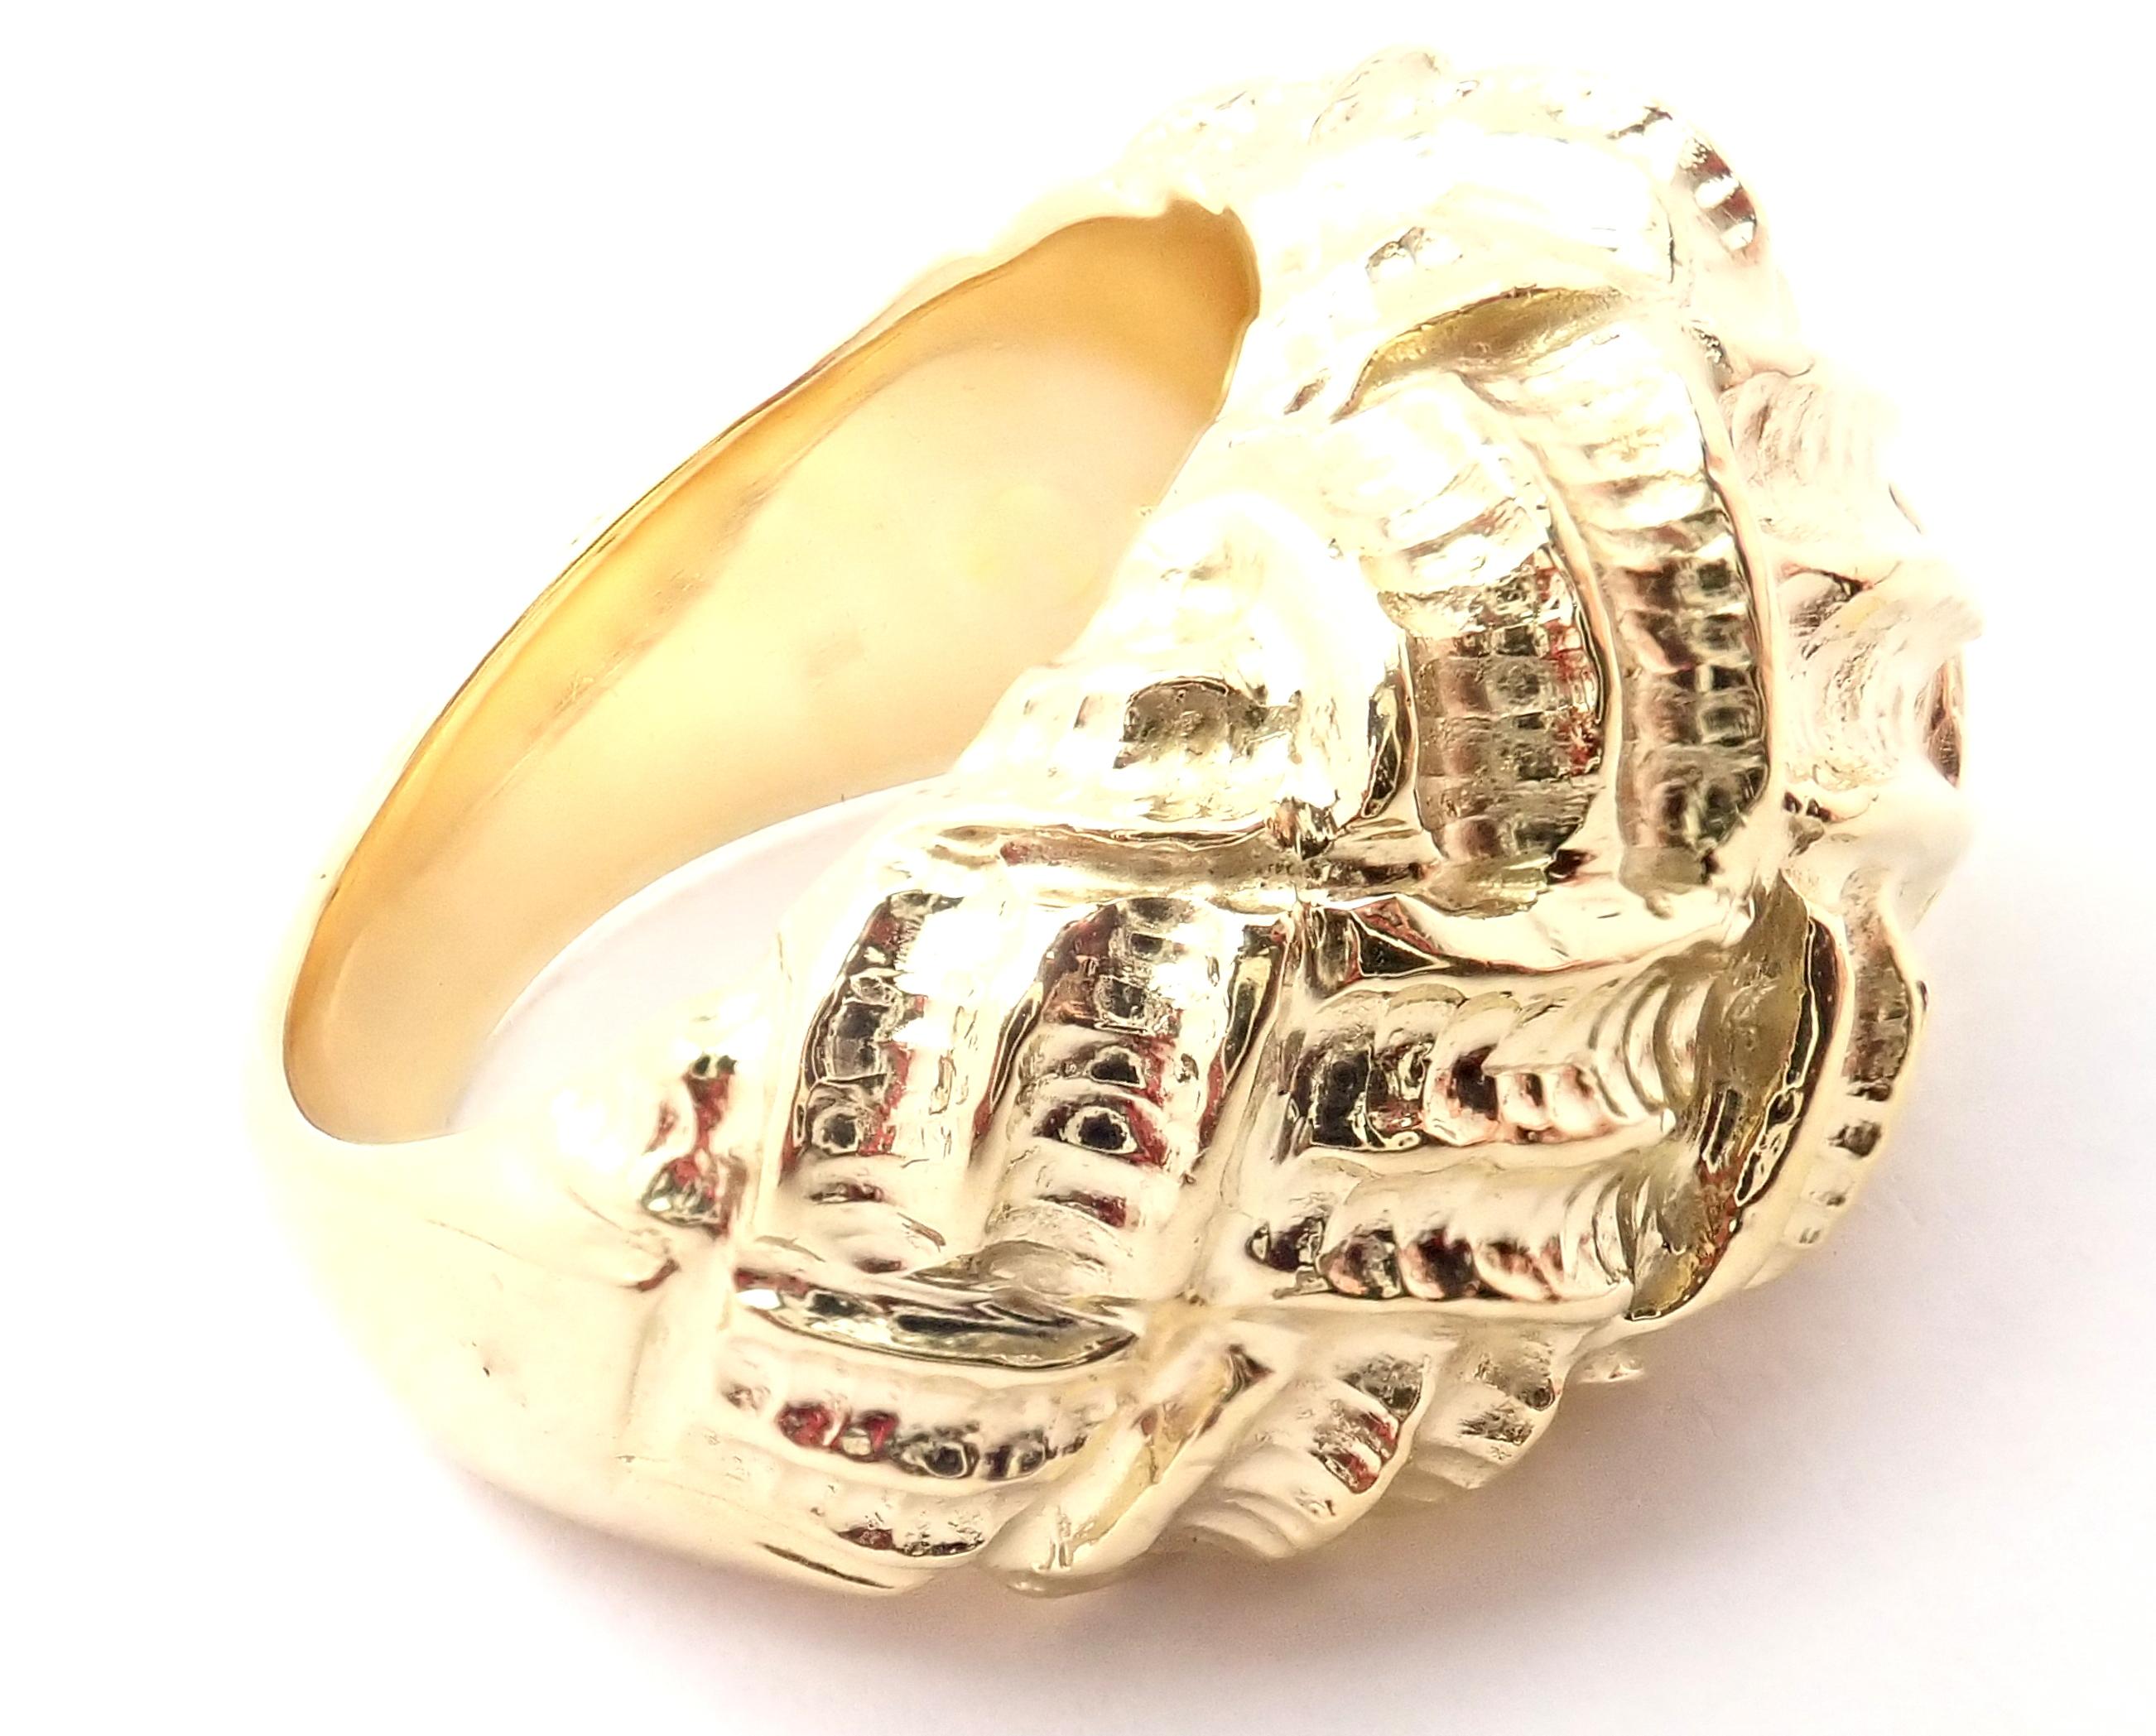 18k Yellow Gold Dome Ring by Tiffany & Co. 
Details: 
Size: 6.5
Width: 15mm
Weight: 9.6 grams
Stamped Hallmarks: Tiffany&Co 92 750 Italy
*Free Shipping within the United States*
YOUR PRICE: $3,000
T2779mote